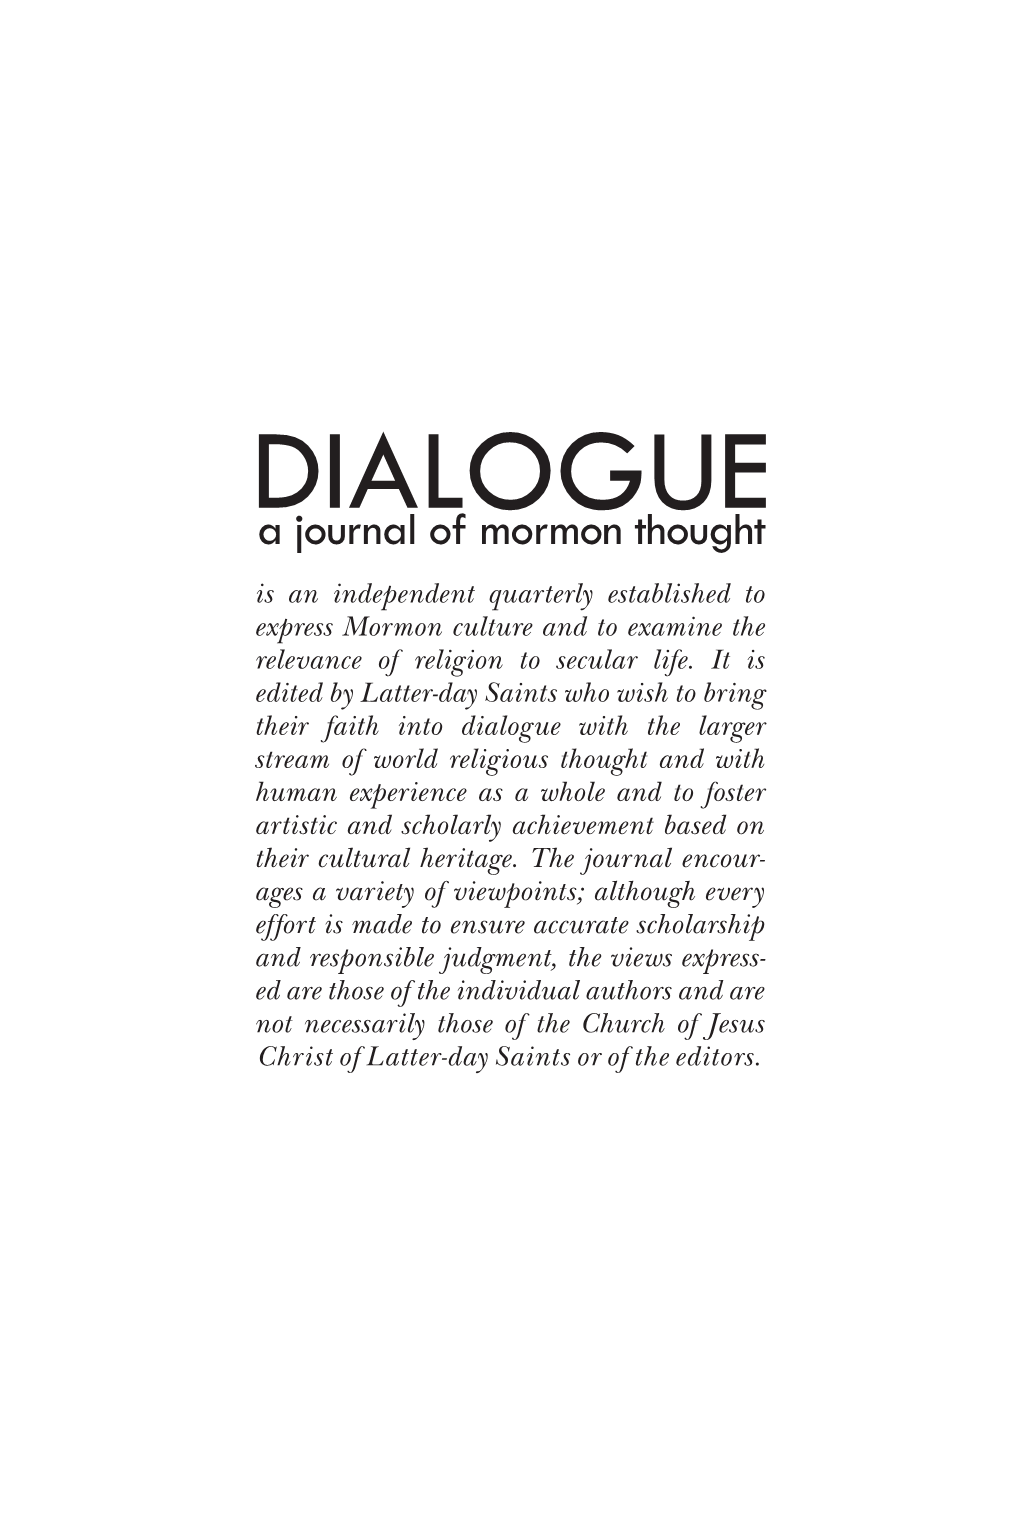 Dialogue: a Journal of Mormon Thought Is Published Quarterly by the Dia- Logue Foundation